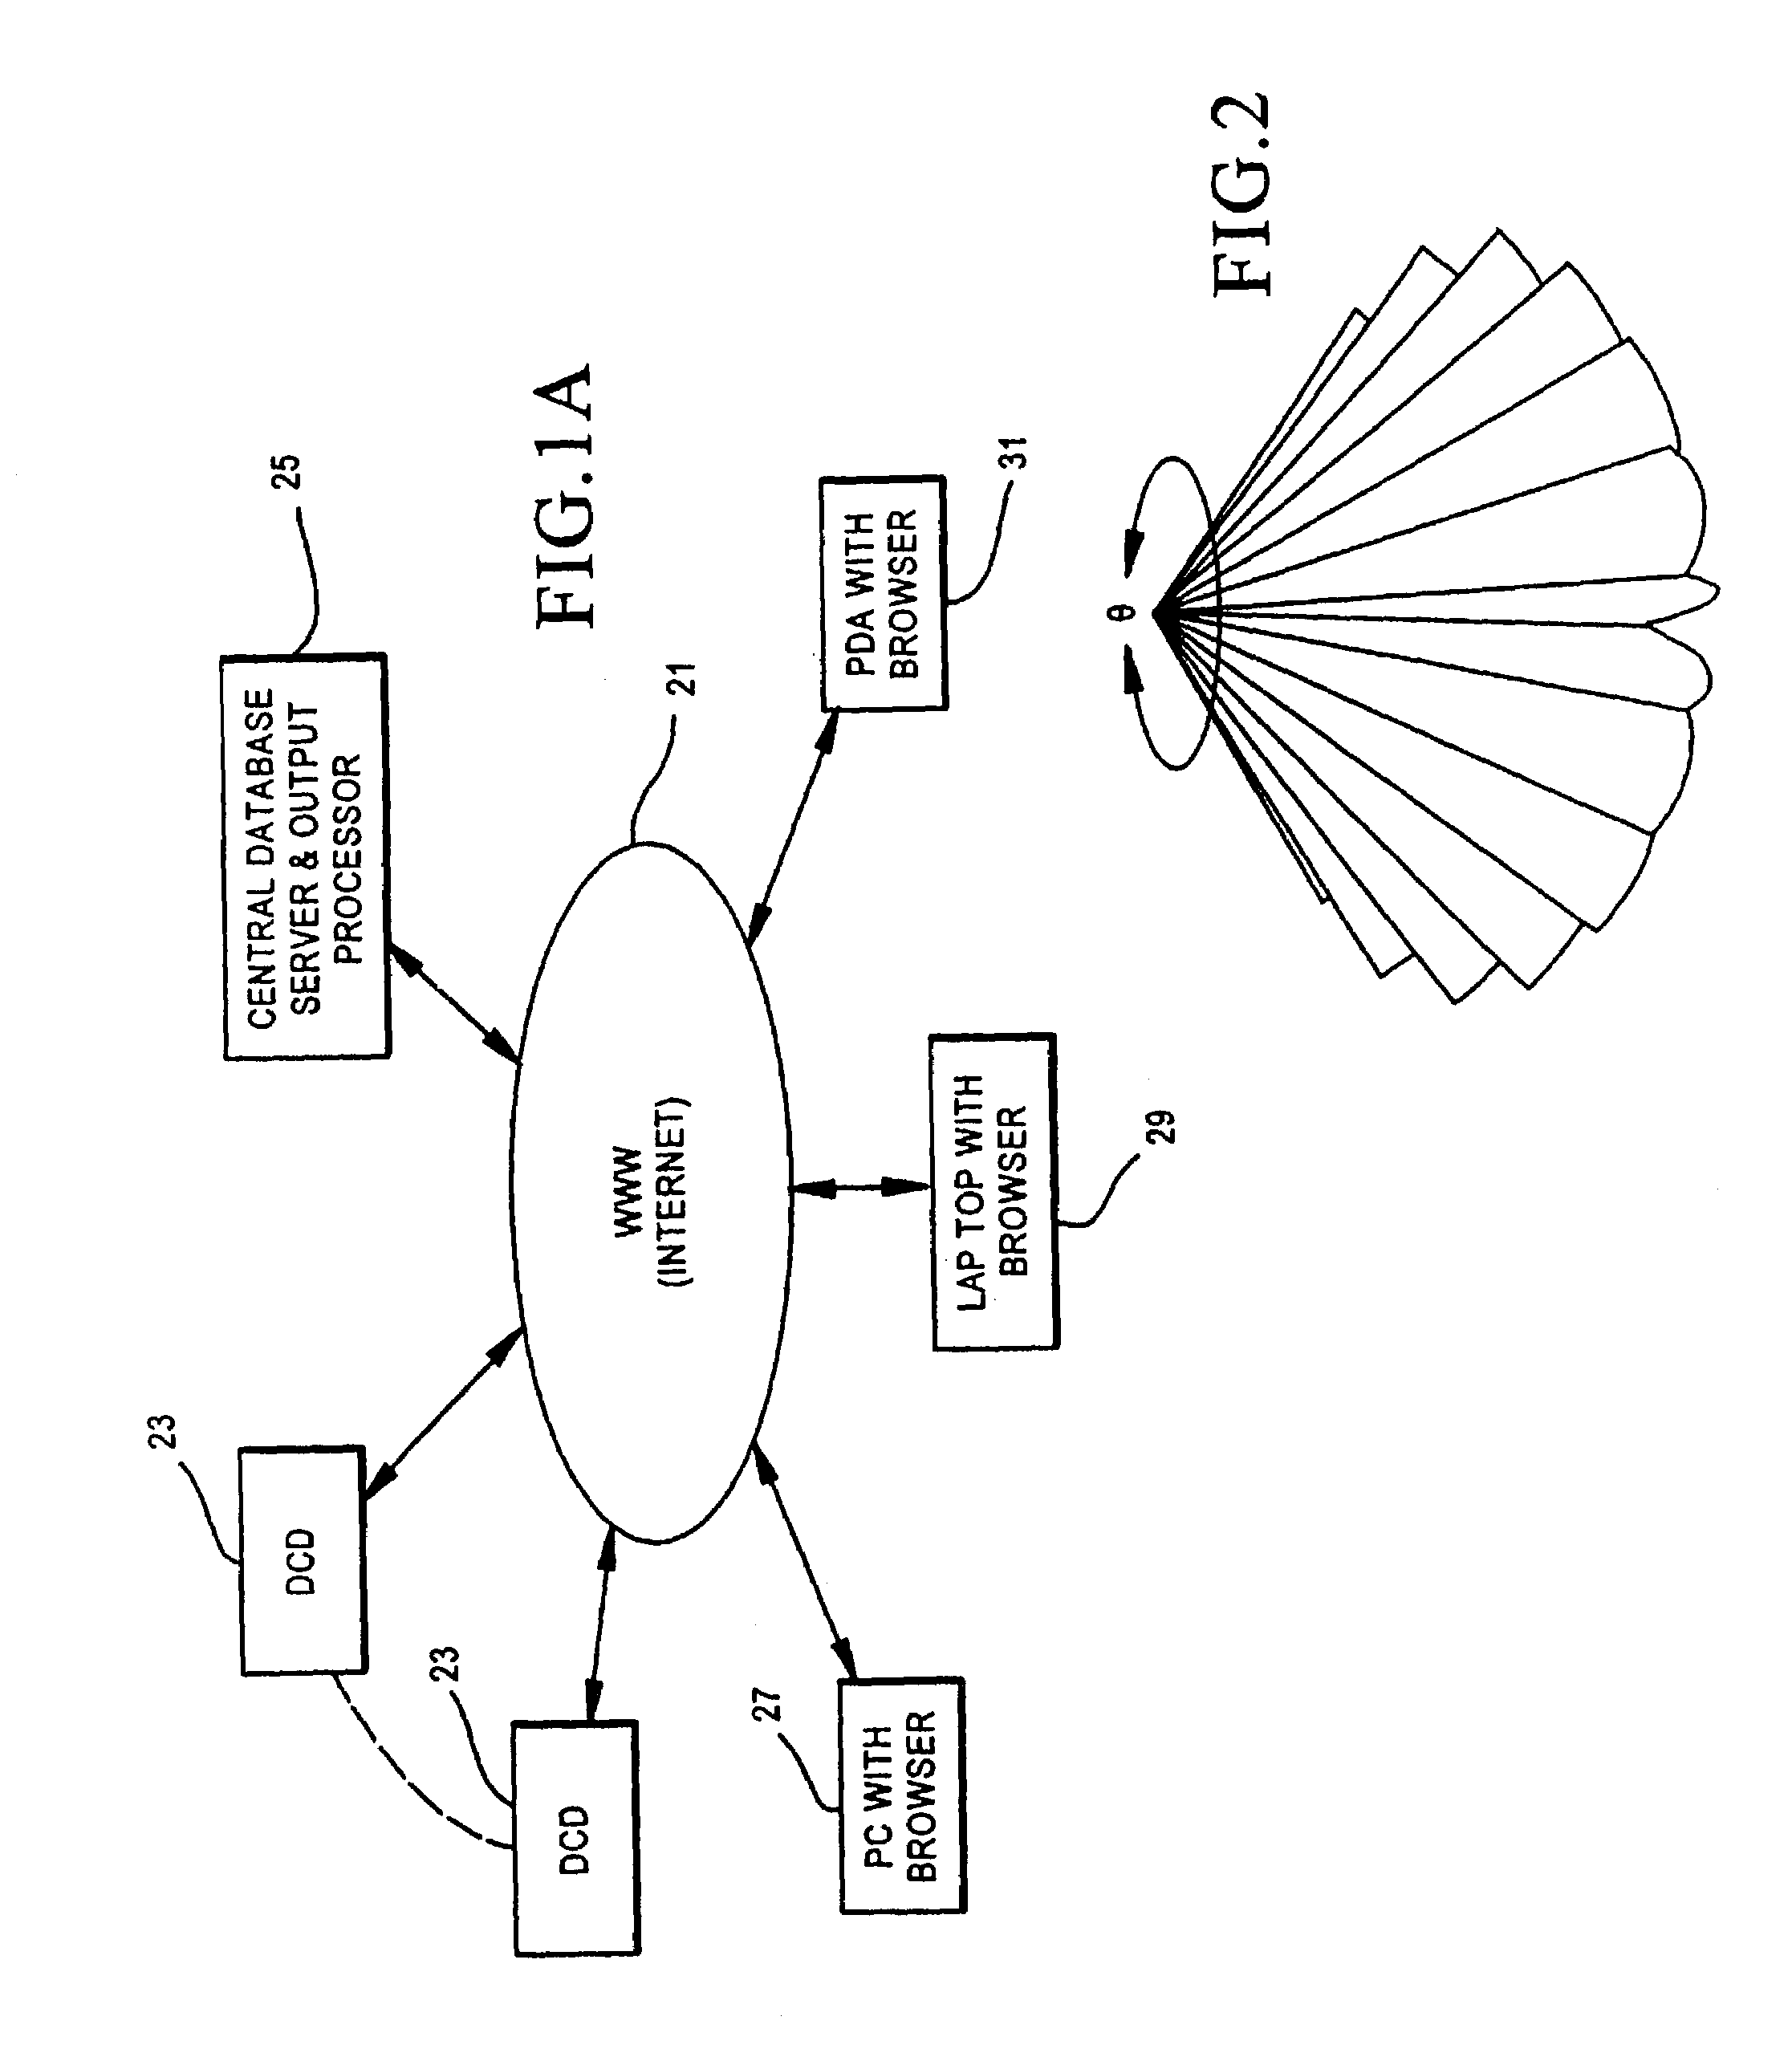 System for remote evaluation of ultrasound information obtained by a programmed application-specific data collection device